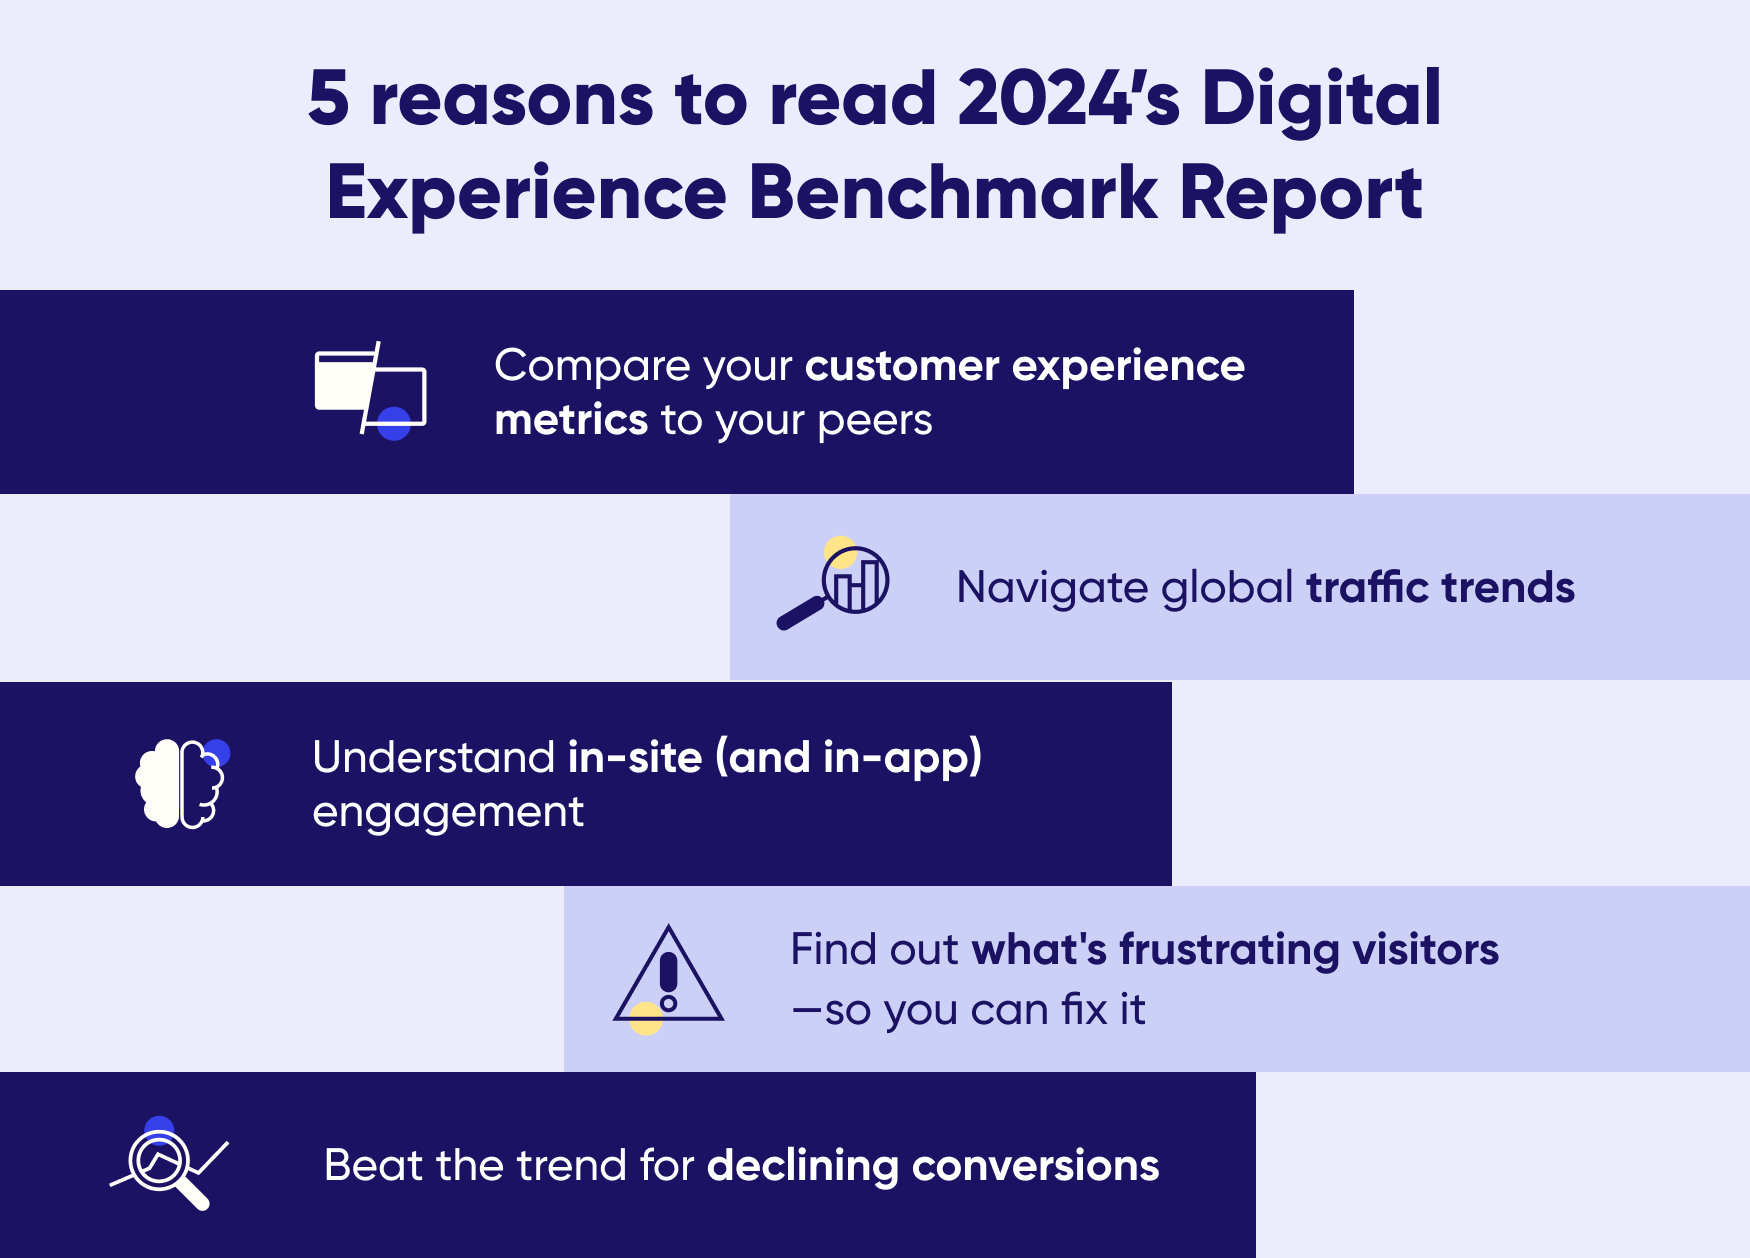 A list of 5 reasons to read 2024's Digital Experience Benchmark Report